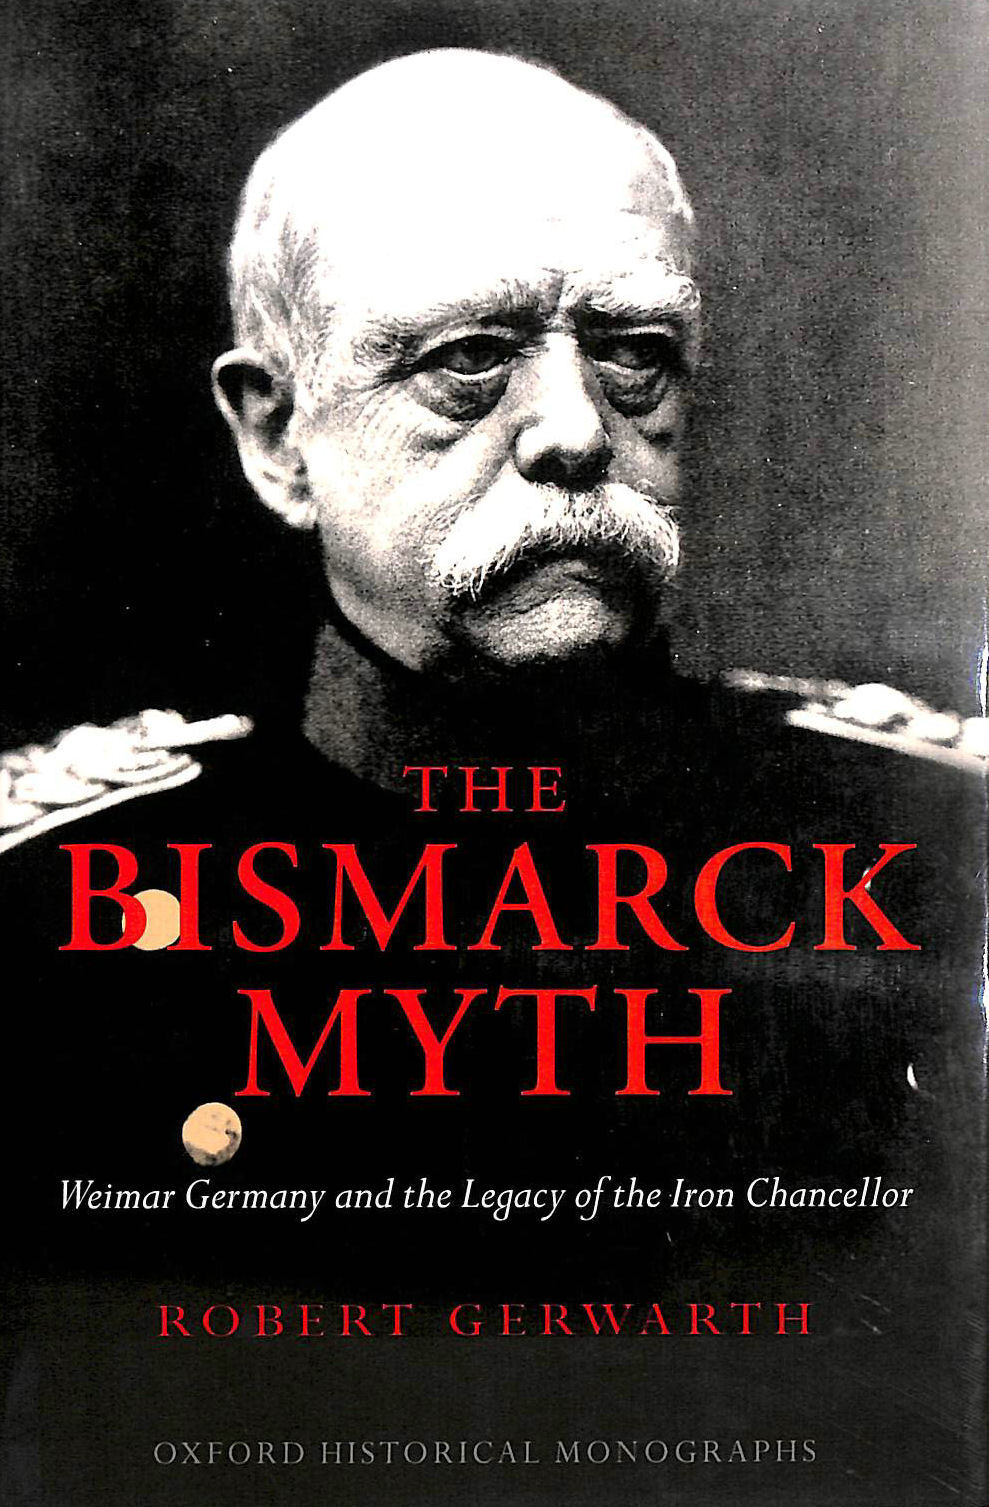  - The Bismarck Myth Weimar Germany and the Legacy of the Iron Chancellor (Oxford Historical Monographs)